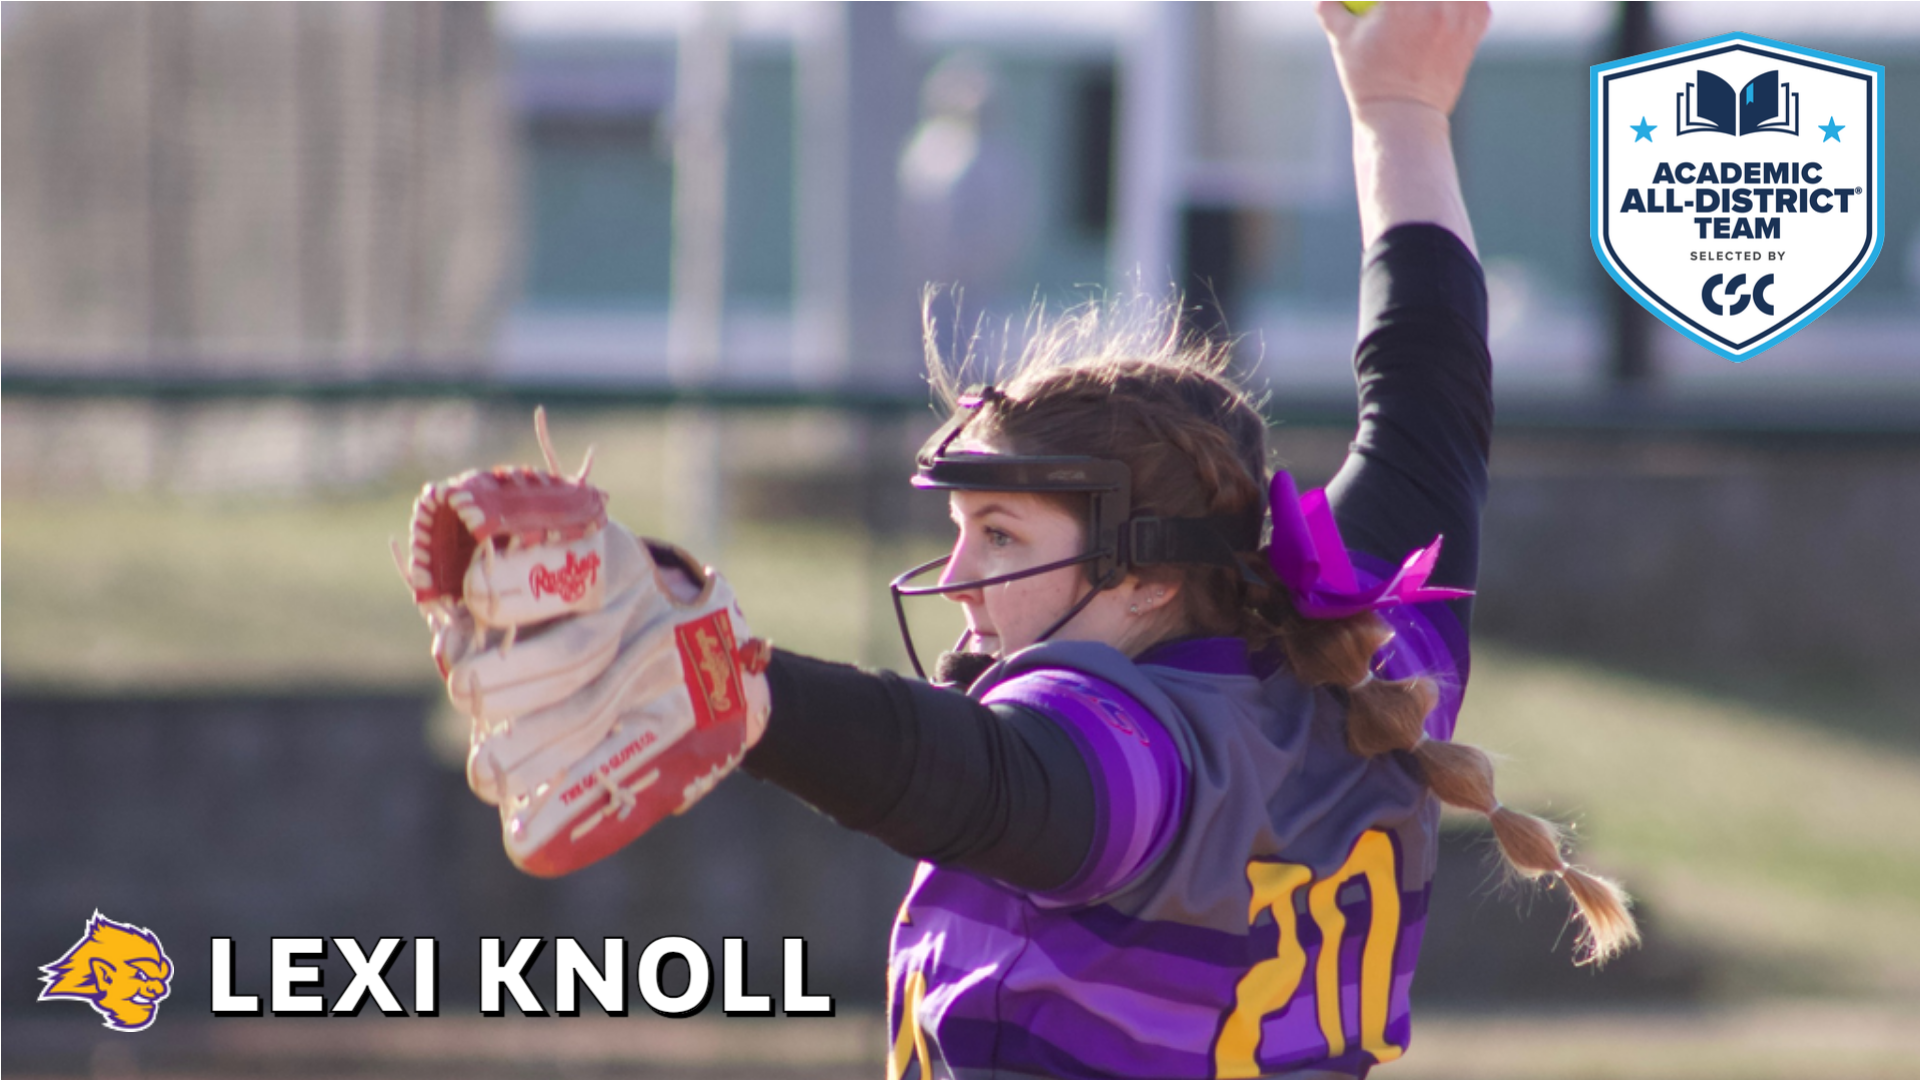 CSC Academic All-District includes Lexi Knoll